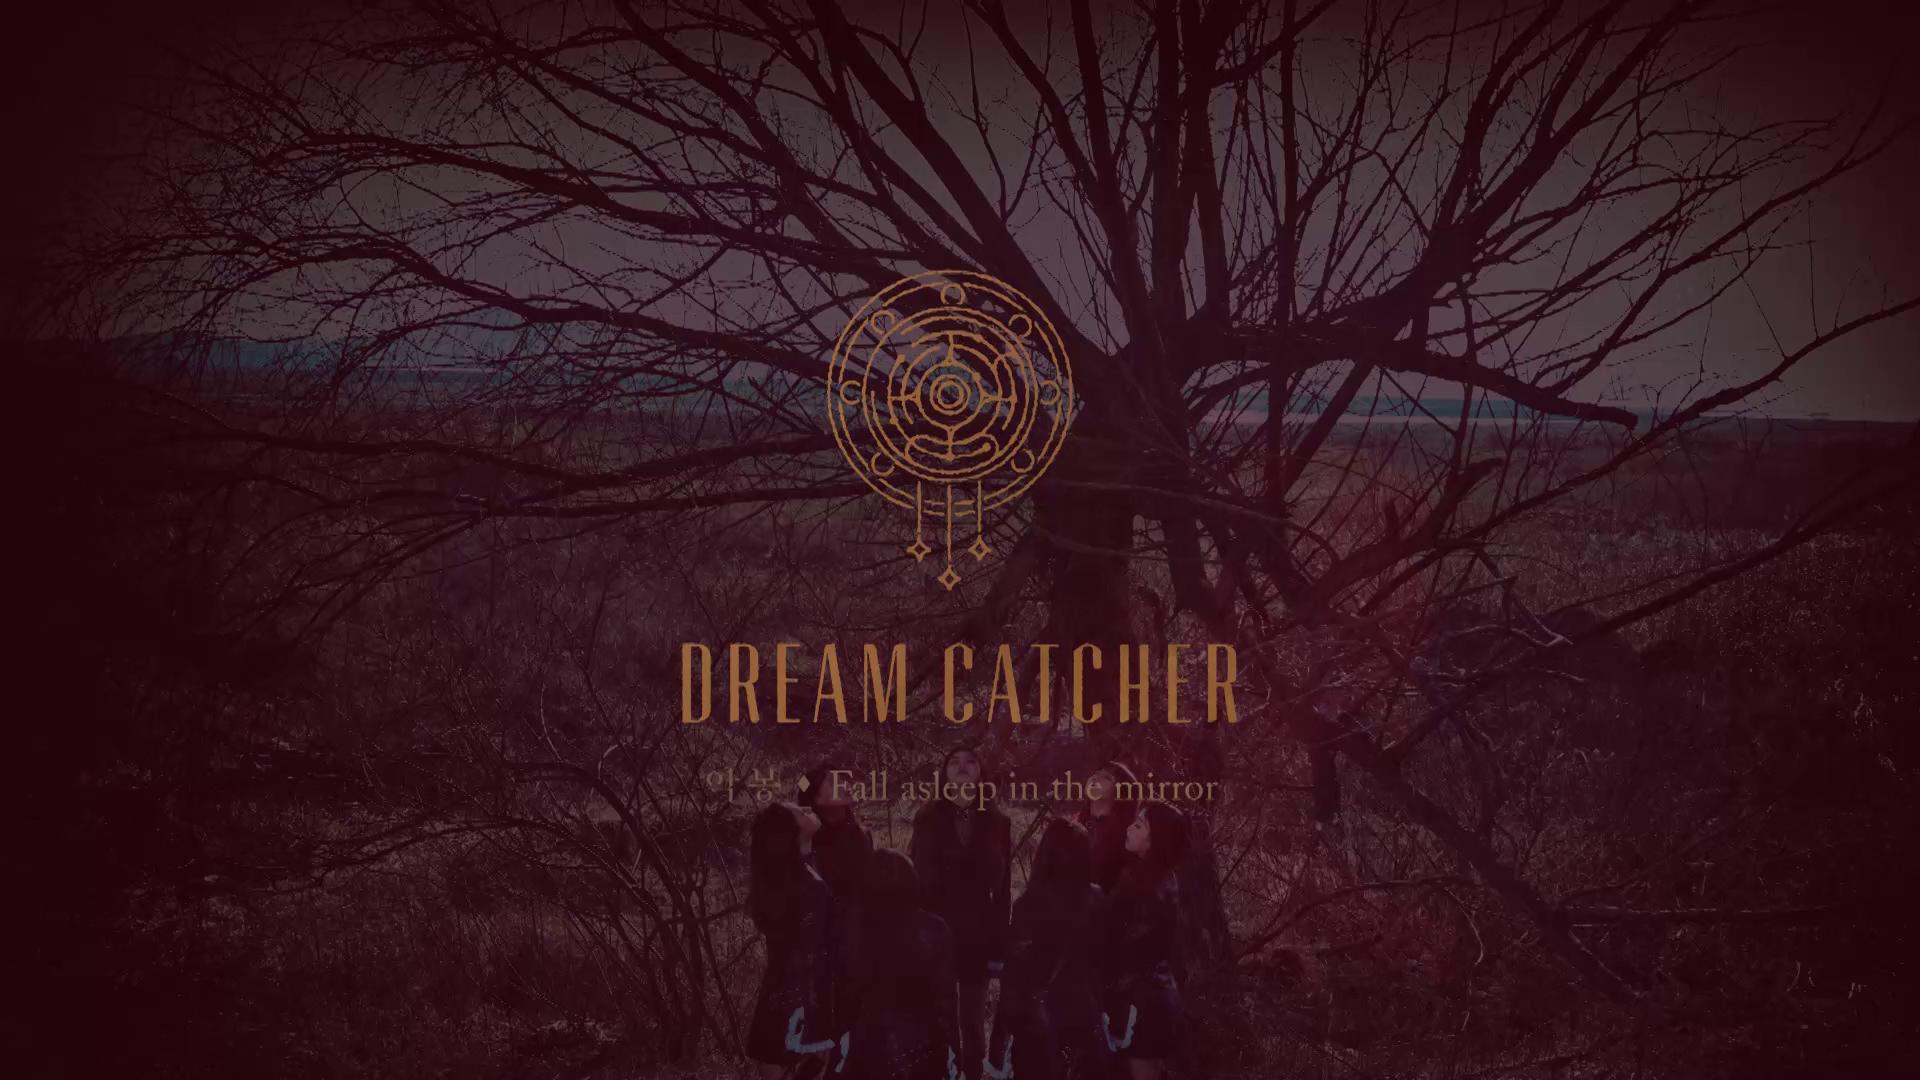 Dreamcatcher(드림캐쳐) "악몽:Fall asleep in the mirror" Preview